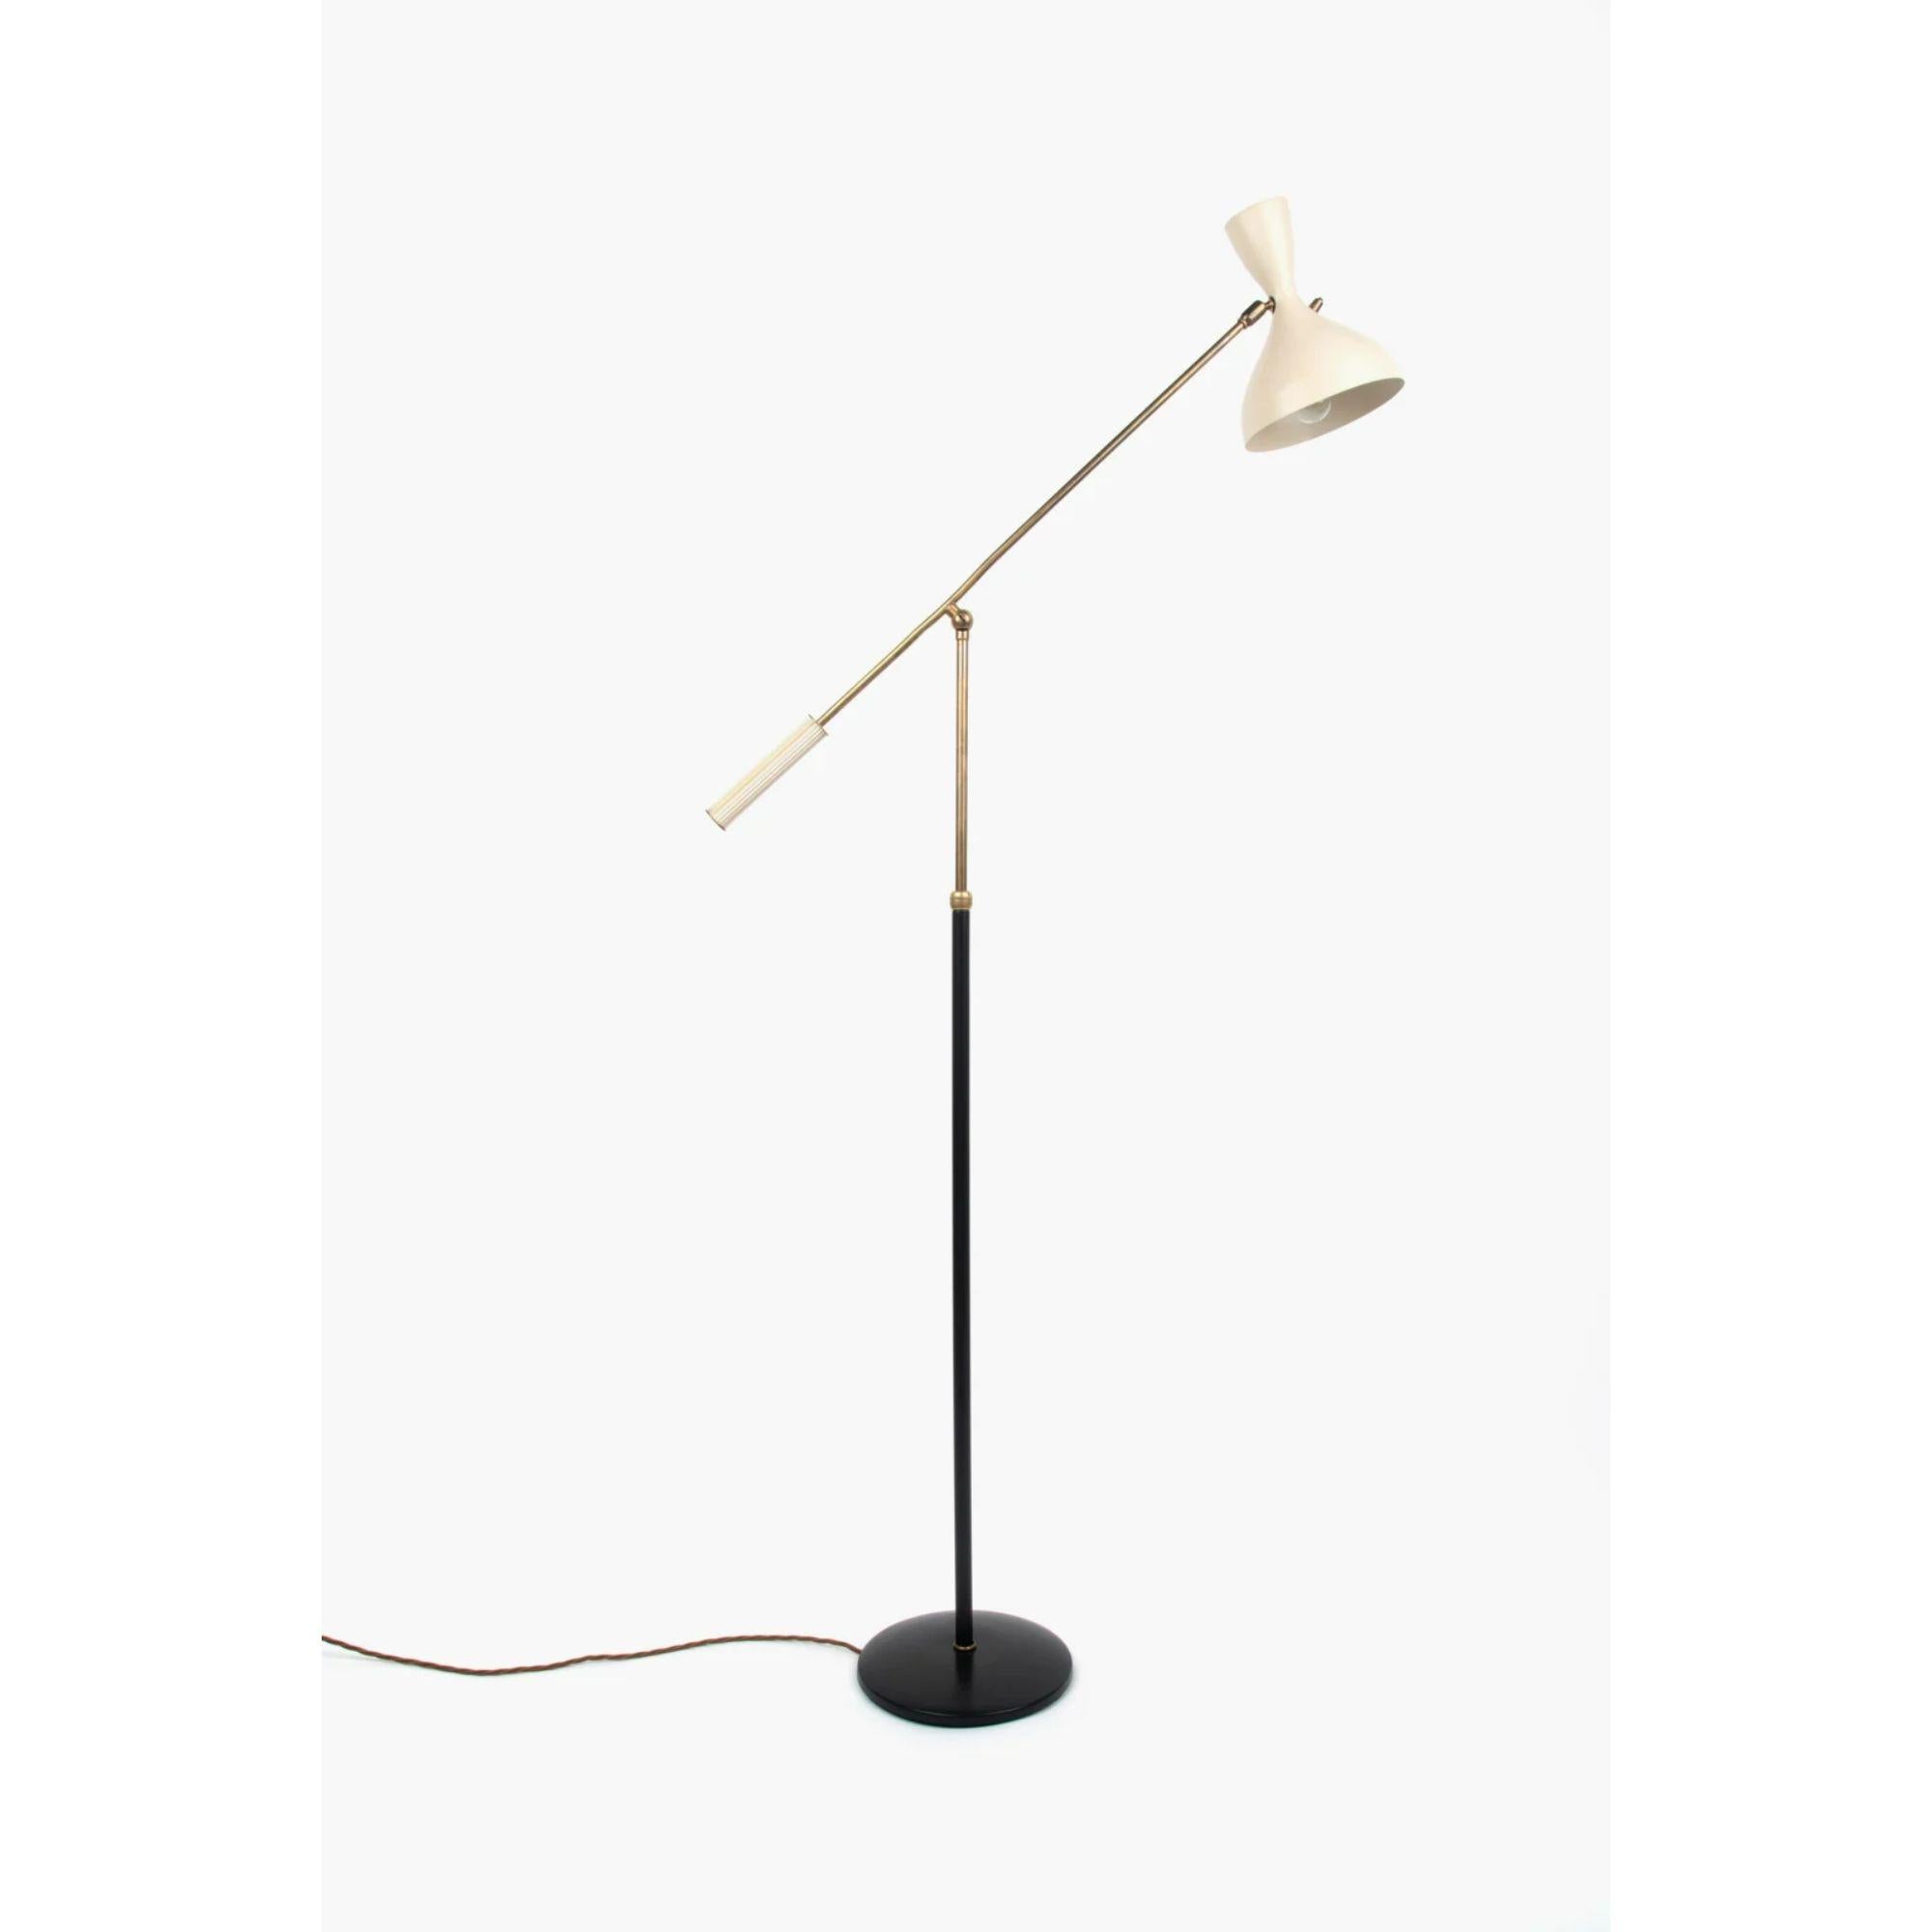 Italian floor lamp by Lumen Milano, 1950s.

1950s Italian floor lamp manufactured by Lumen.

Brass metalwork with details painted in black and cream, and a cream painted aluminium 'diablo' shade.

The shade and counter-balanced arm are fully